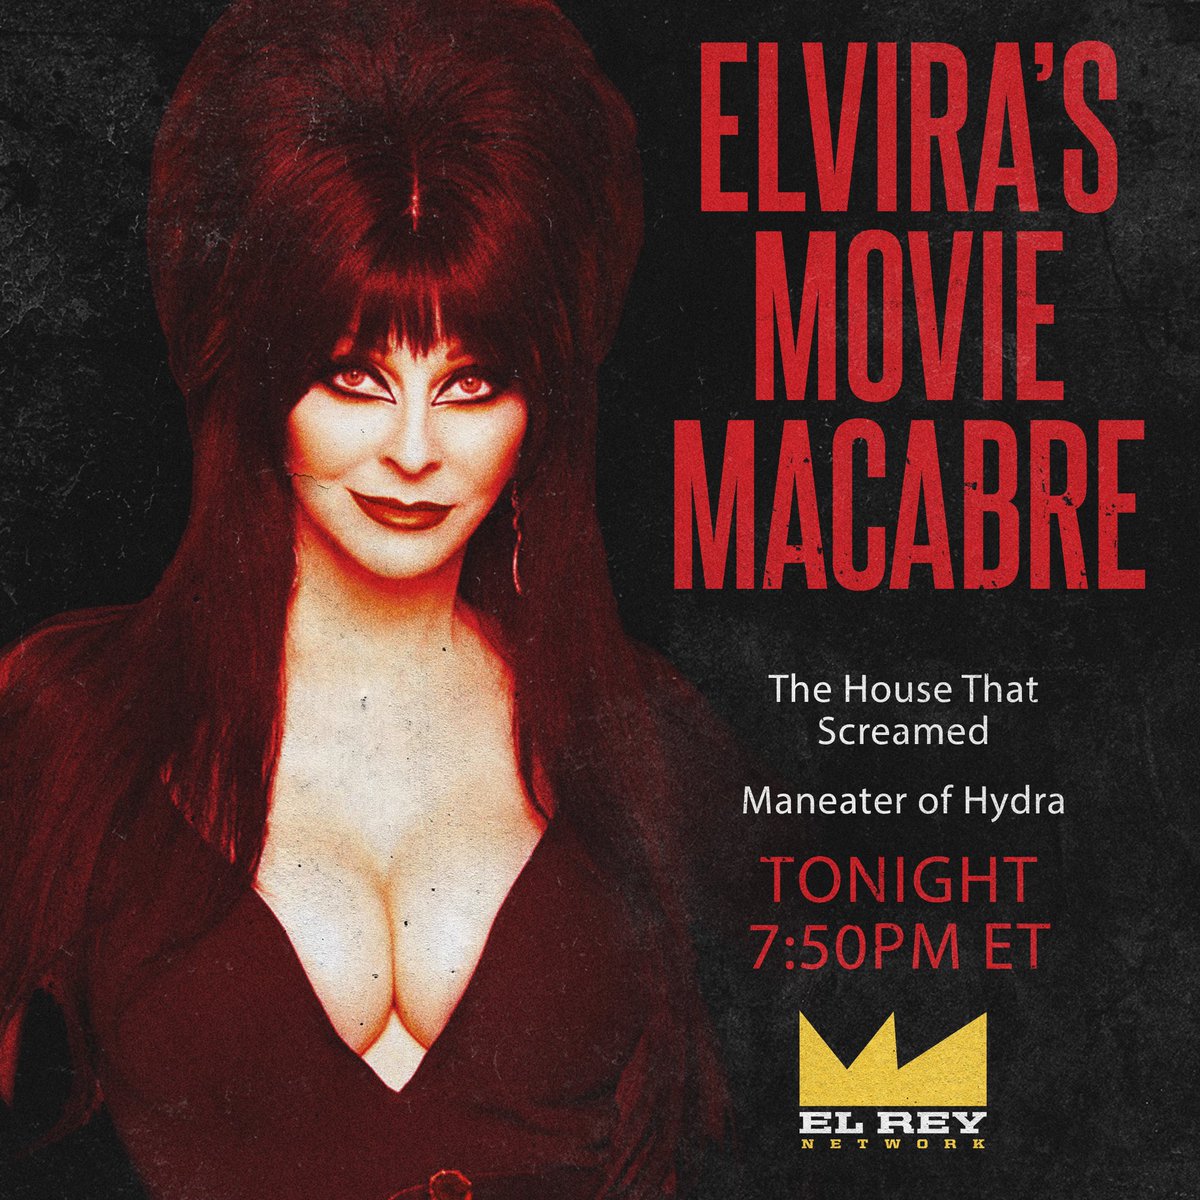 Tonight, get cozy for Elvira's Movie Macabre! Two movies, The House That Screamed and Maneater of Hydra starting at 7:50pm ET on #ElReyNetwork